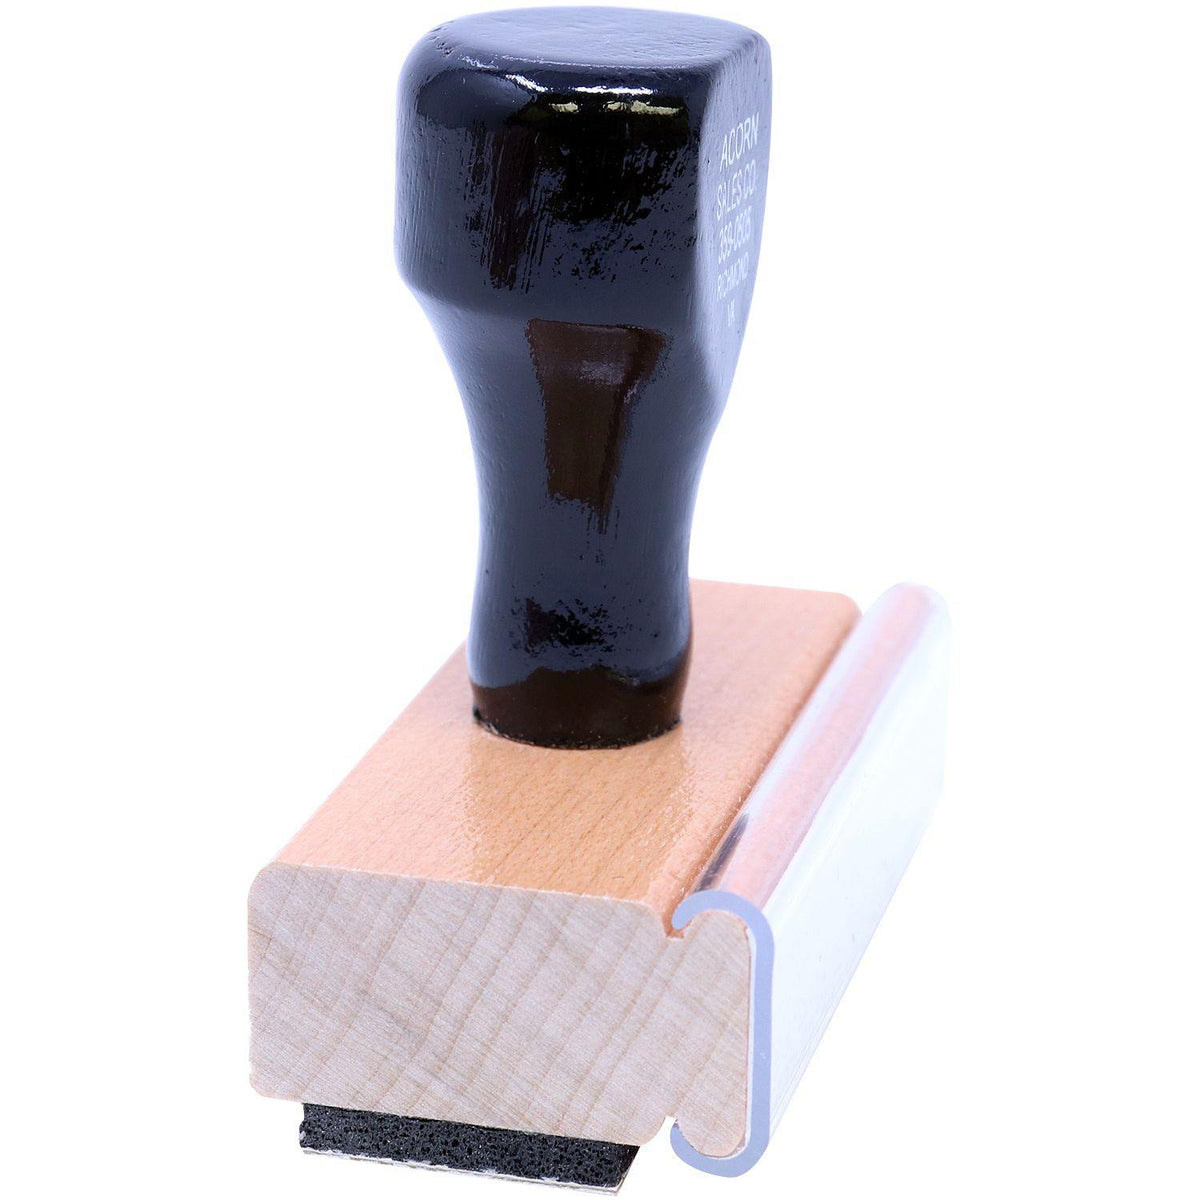 Large Shred Rubber Stamp - Engineer Seal Stamps - Brand_Acorn, Impression Size_Large, Stamp Type_Regular Stamp, Type of Use_Office